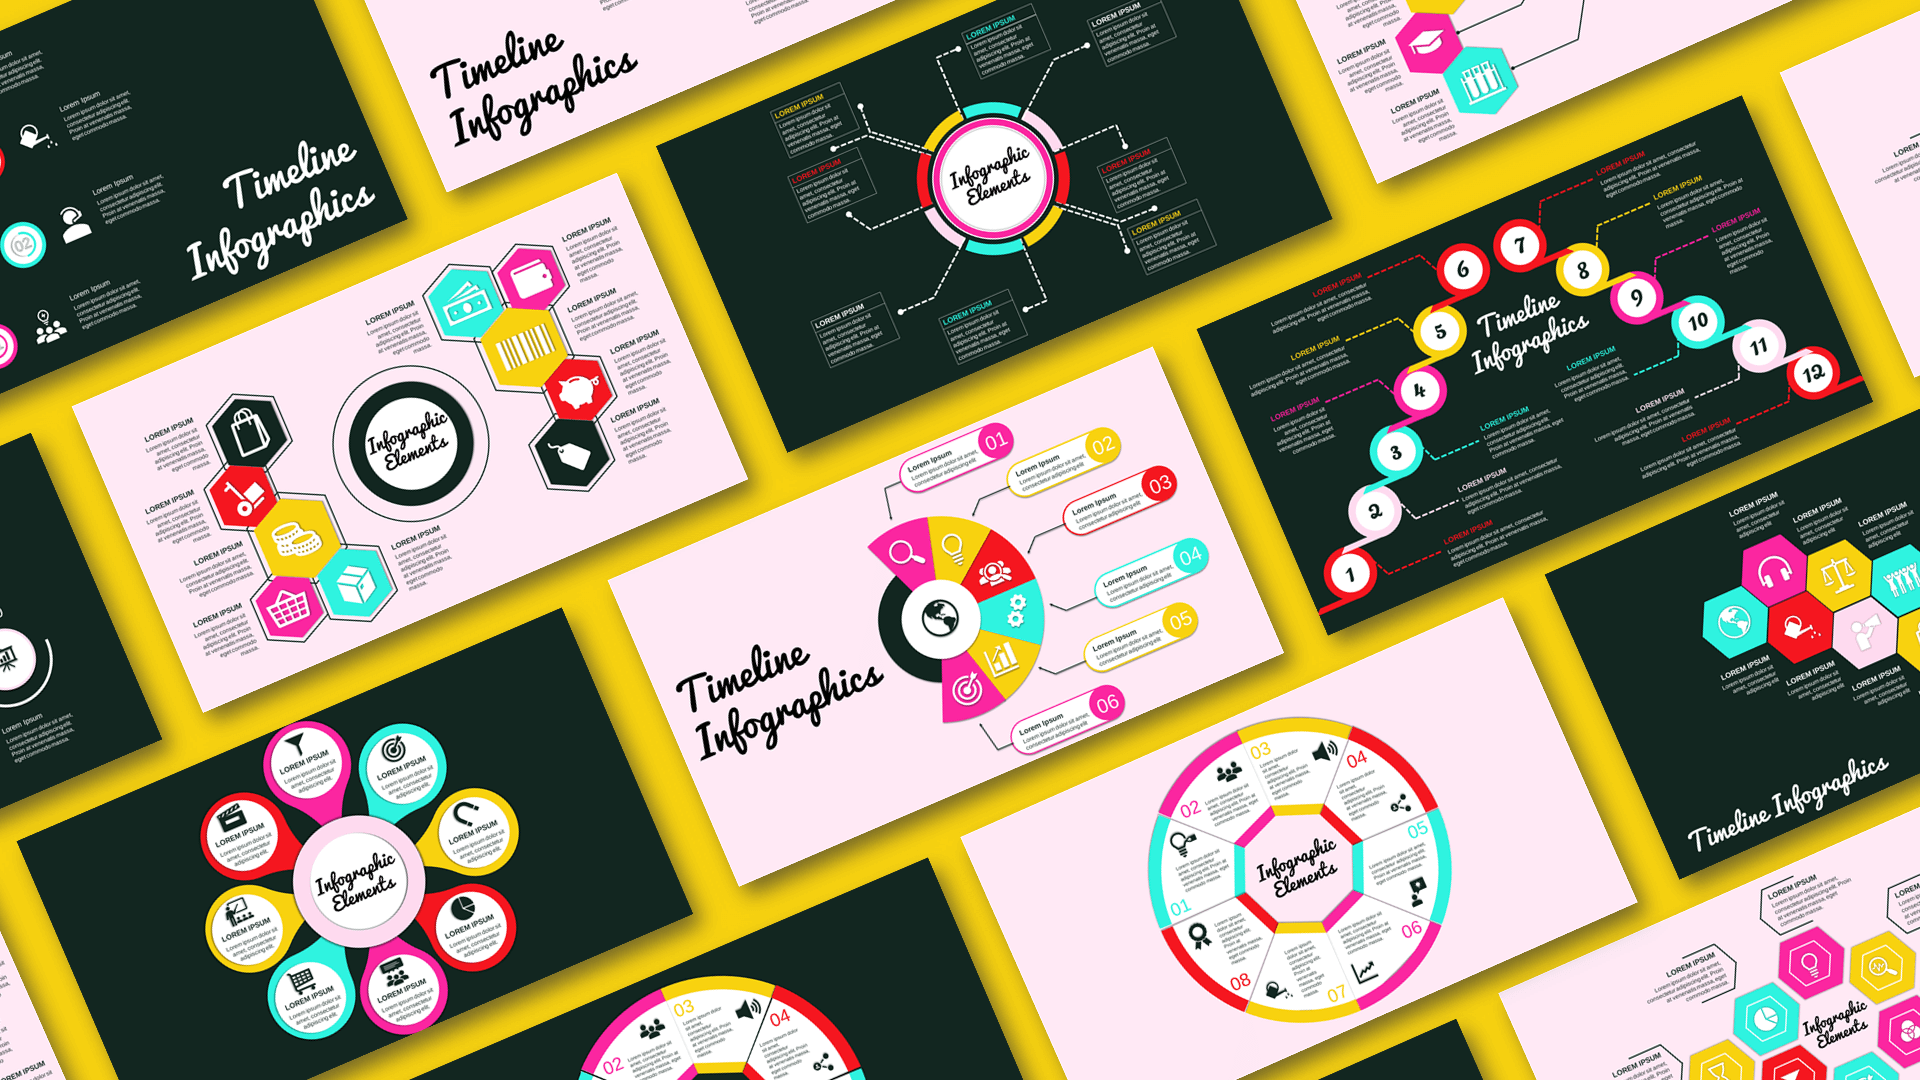 Keira PowerPoint Infographic Templates